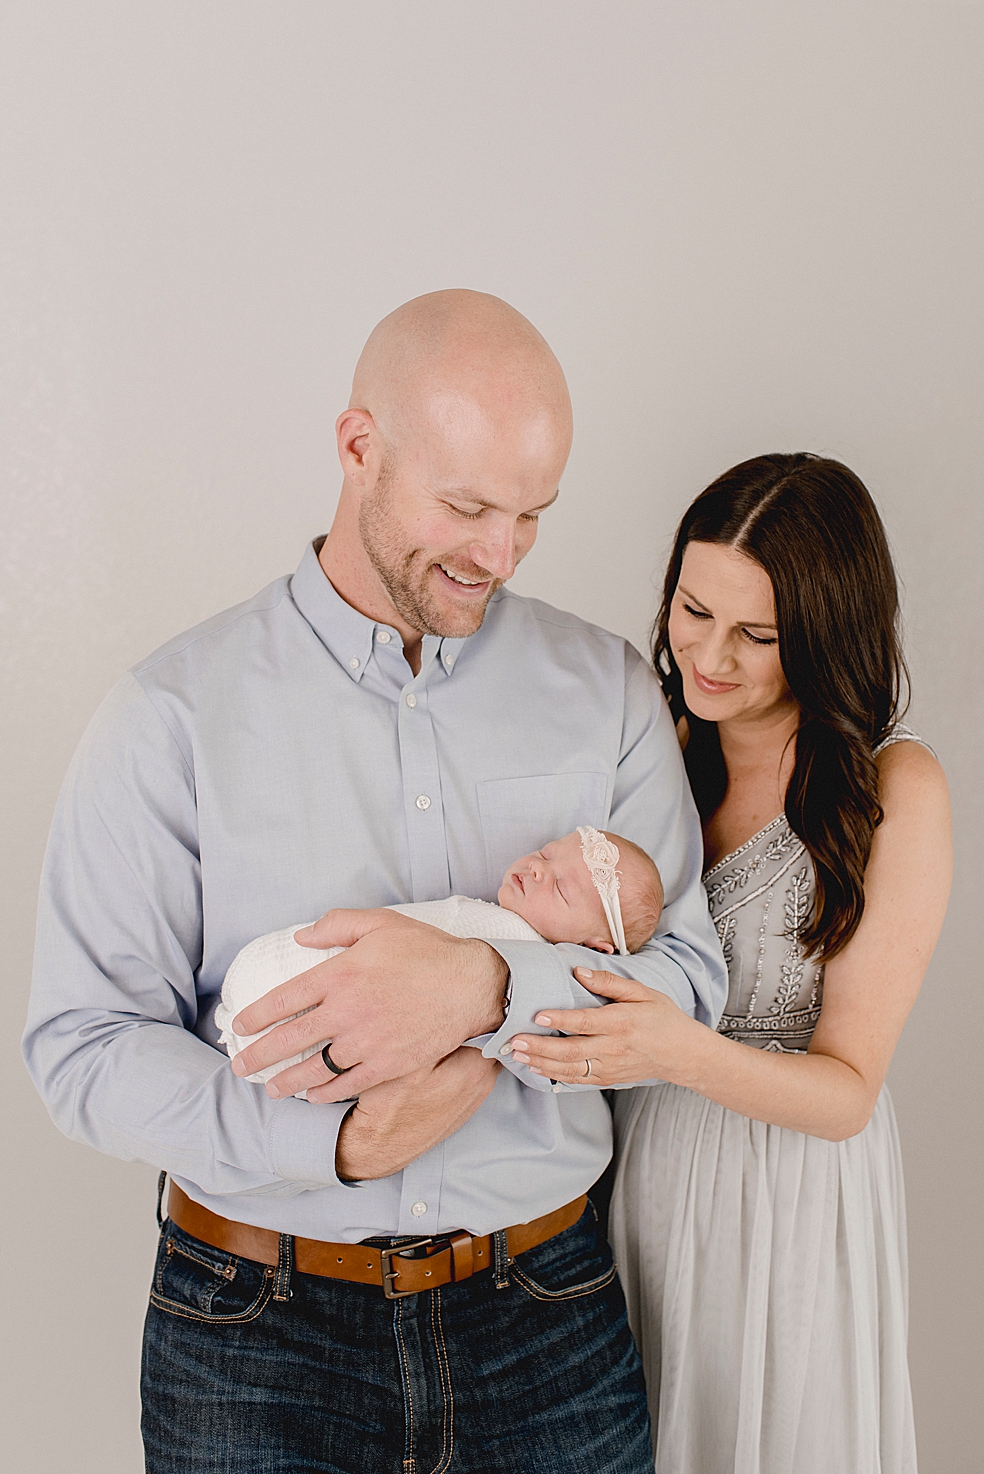 New mom and dad holding newborn baby girl | Photo by Jessica Lee Photography